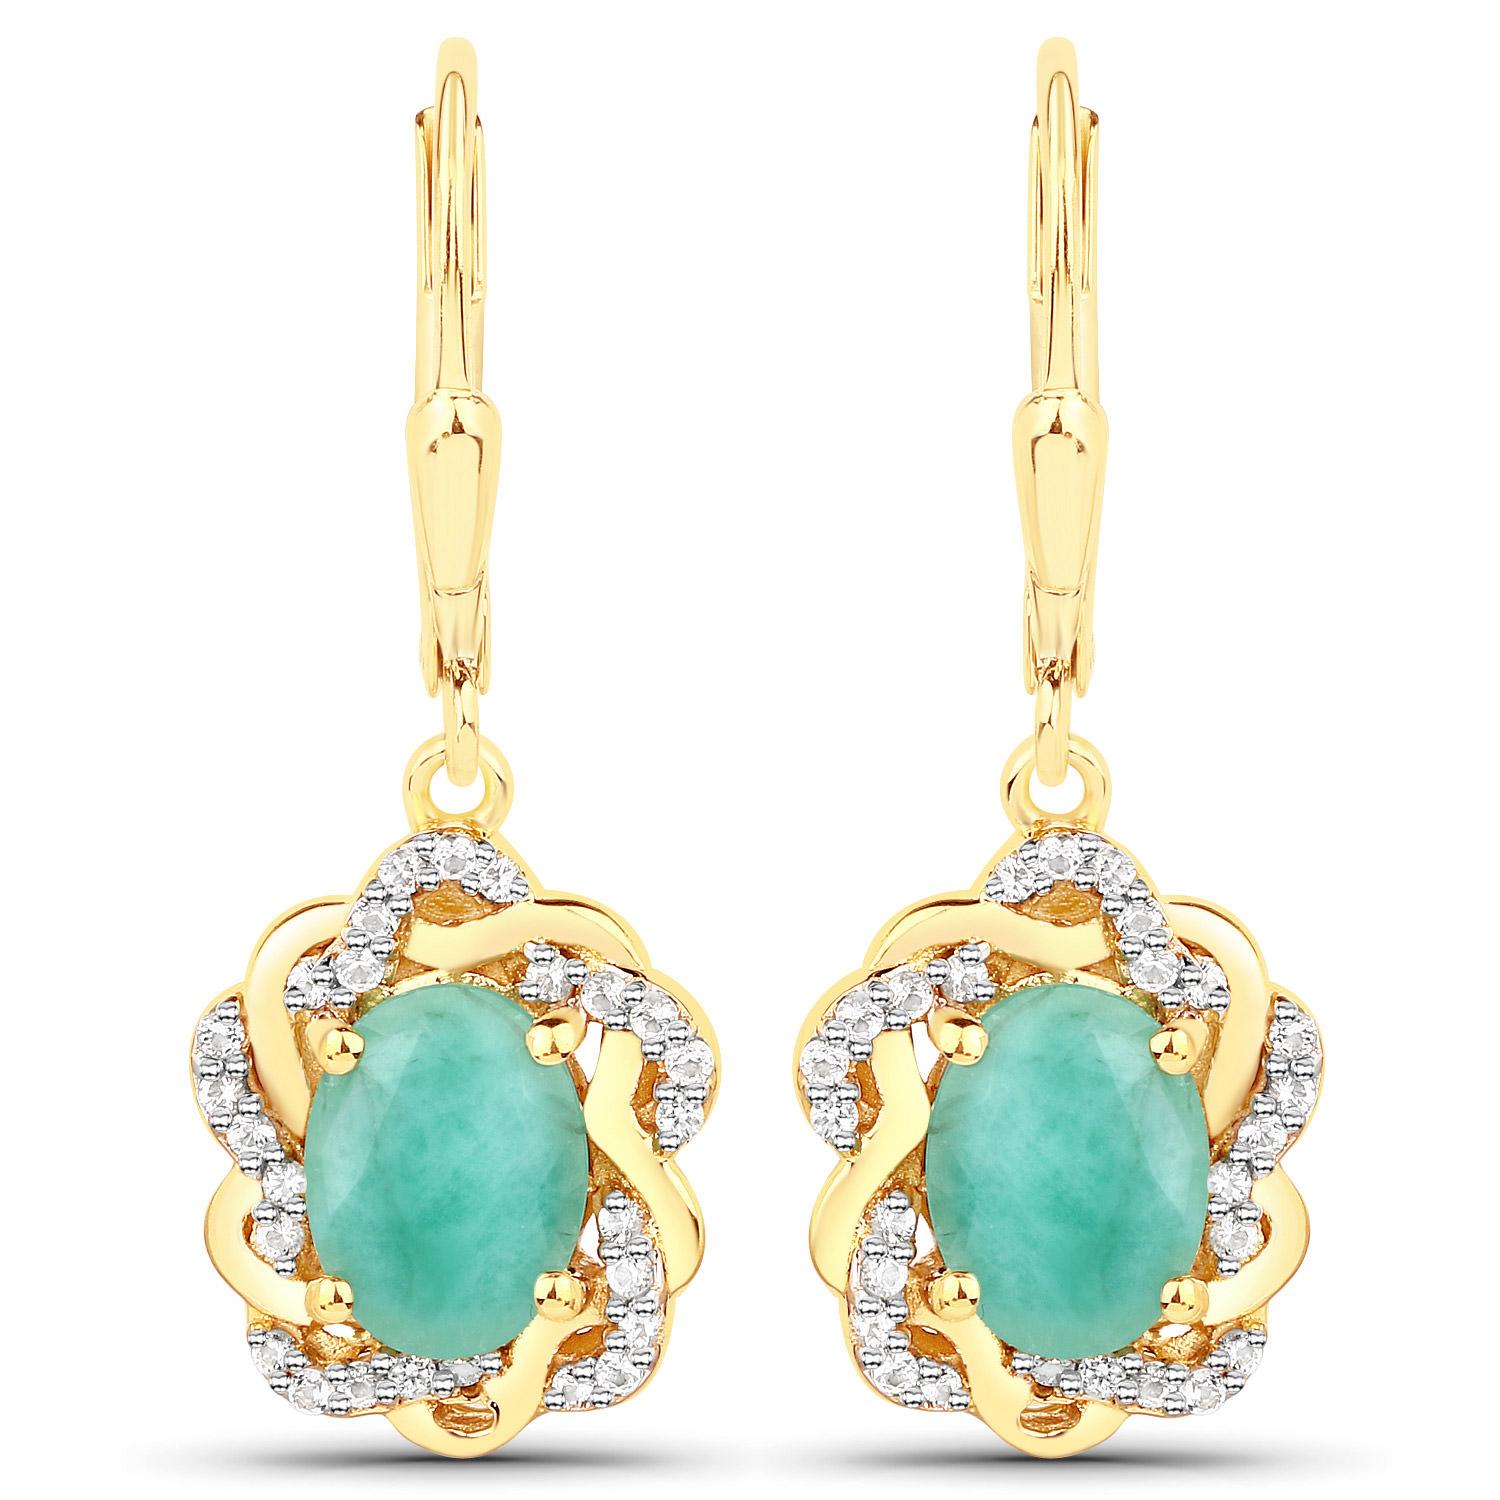 Natural Emerald & Topaz Dangle Earrings 14k Gold Plated Silver In Excellent Condition For Sale In Laguna Niguel, CA